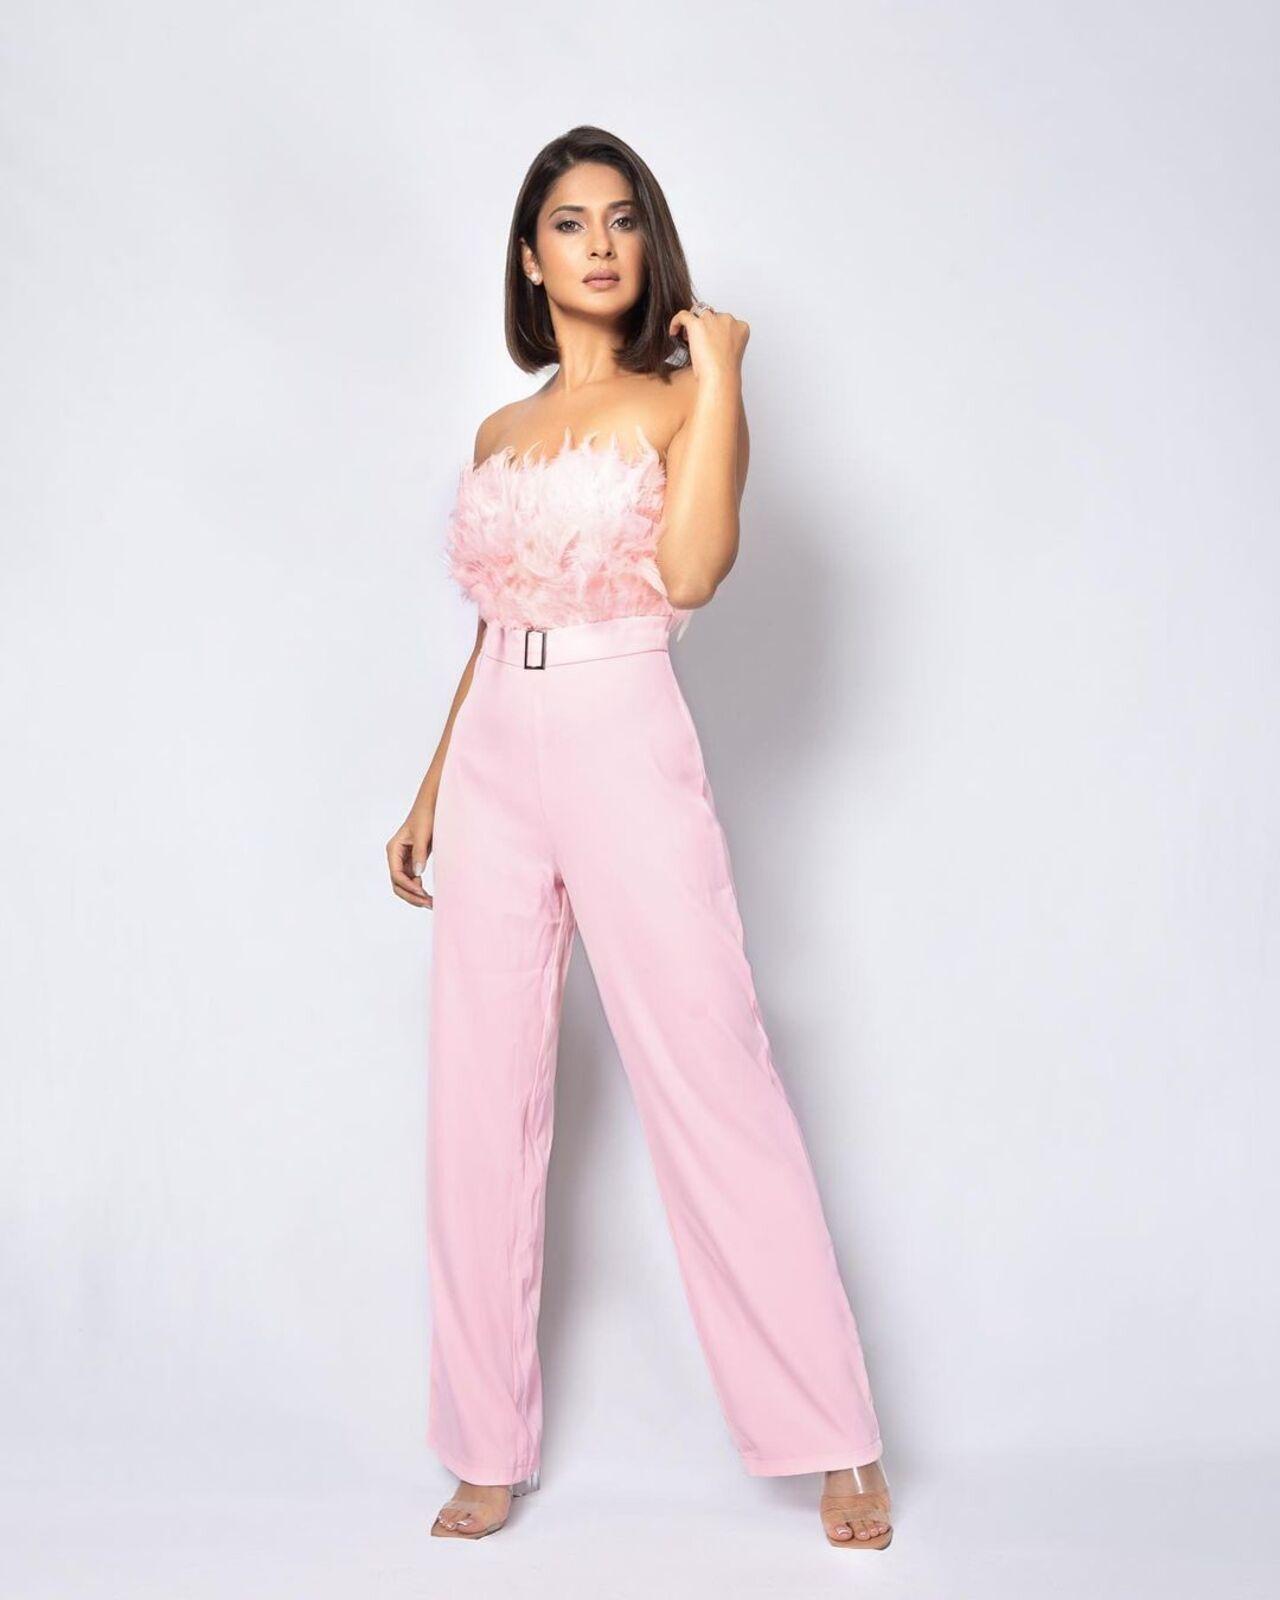 For one of her photoshoots, Jennifer Winget opted for a stunning pink-on-pink outfit